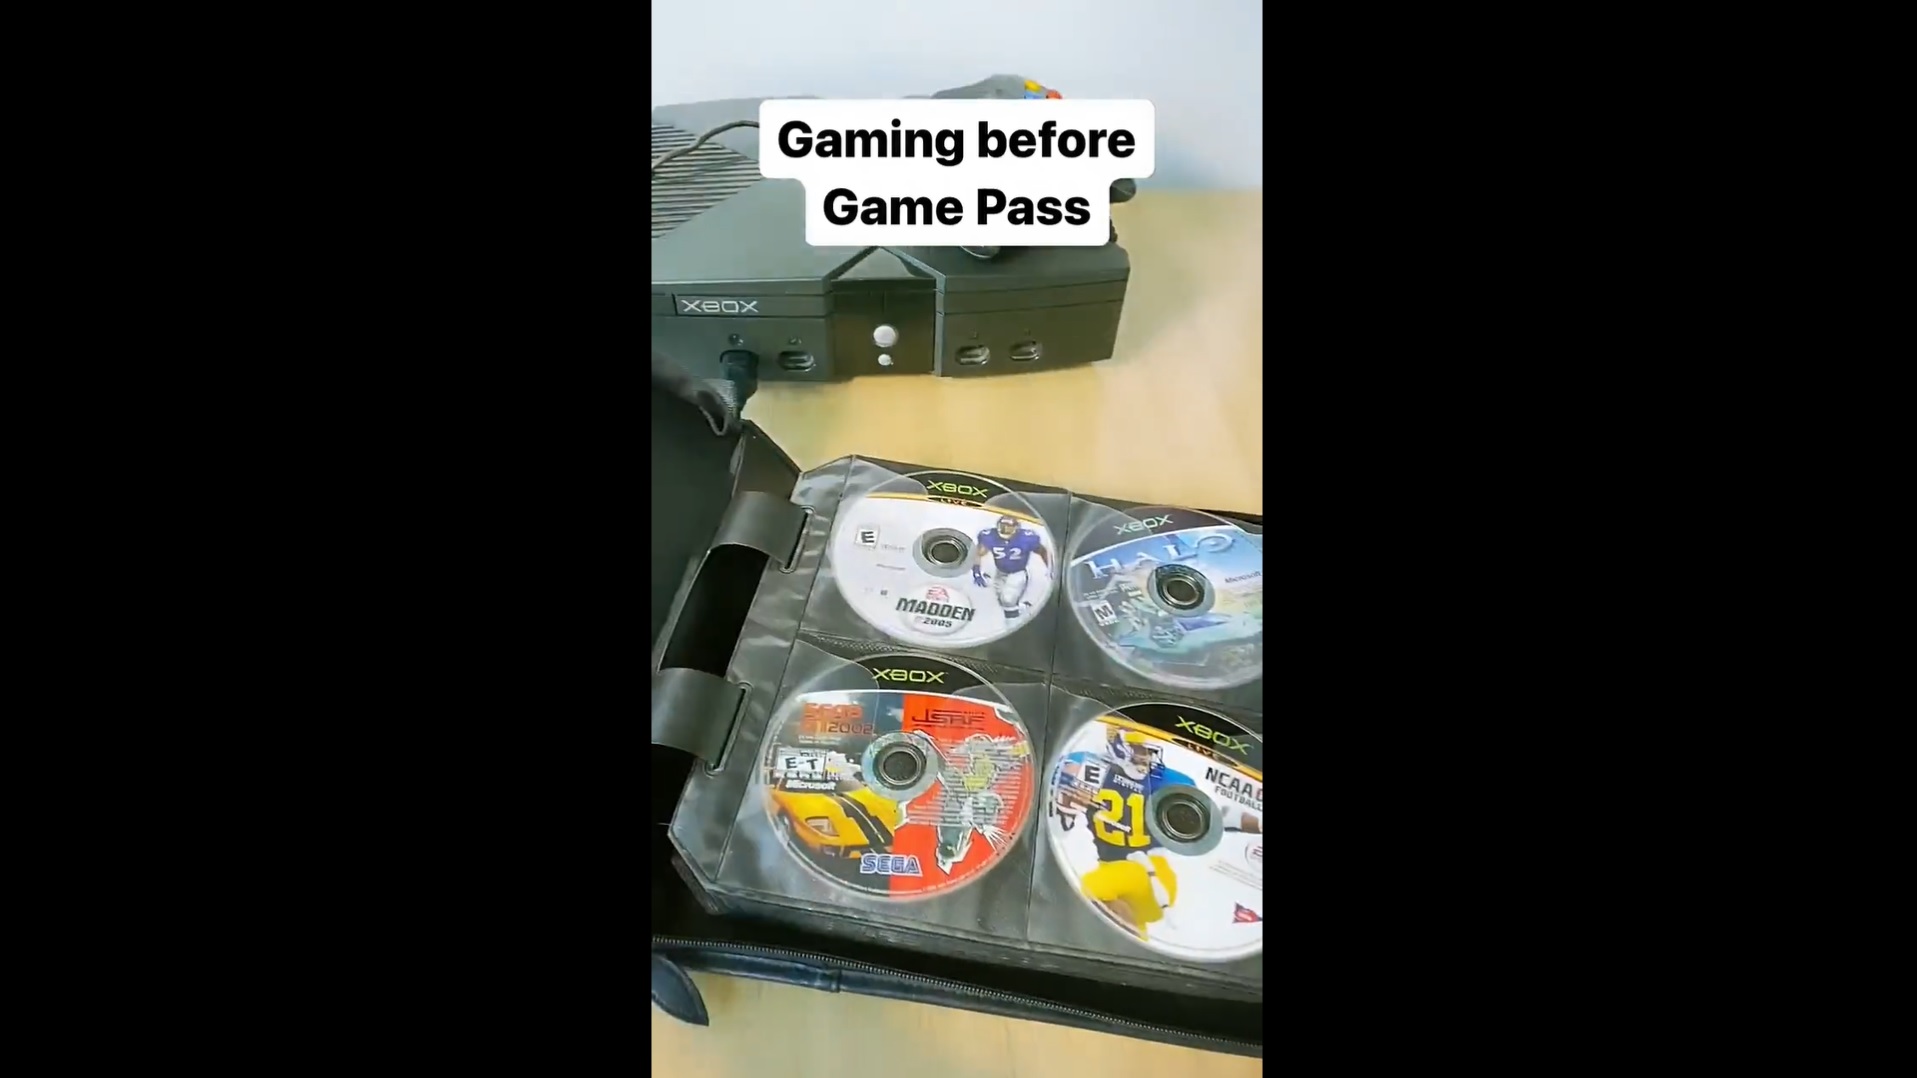 Physical media collectors feel insulted by Xbox Game Pass ad